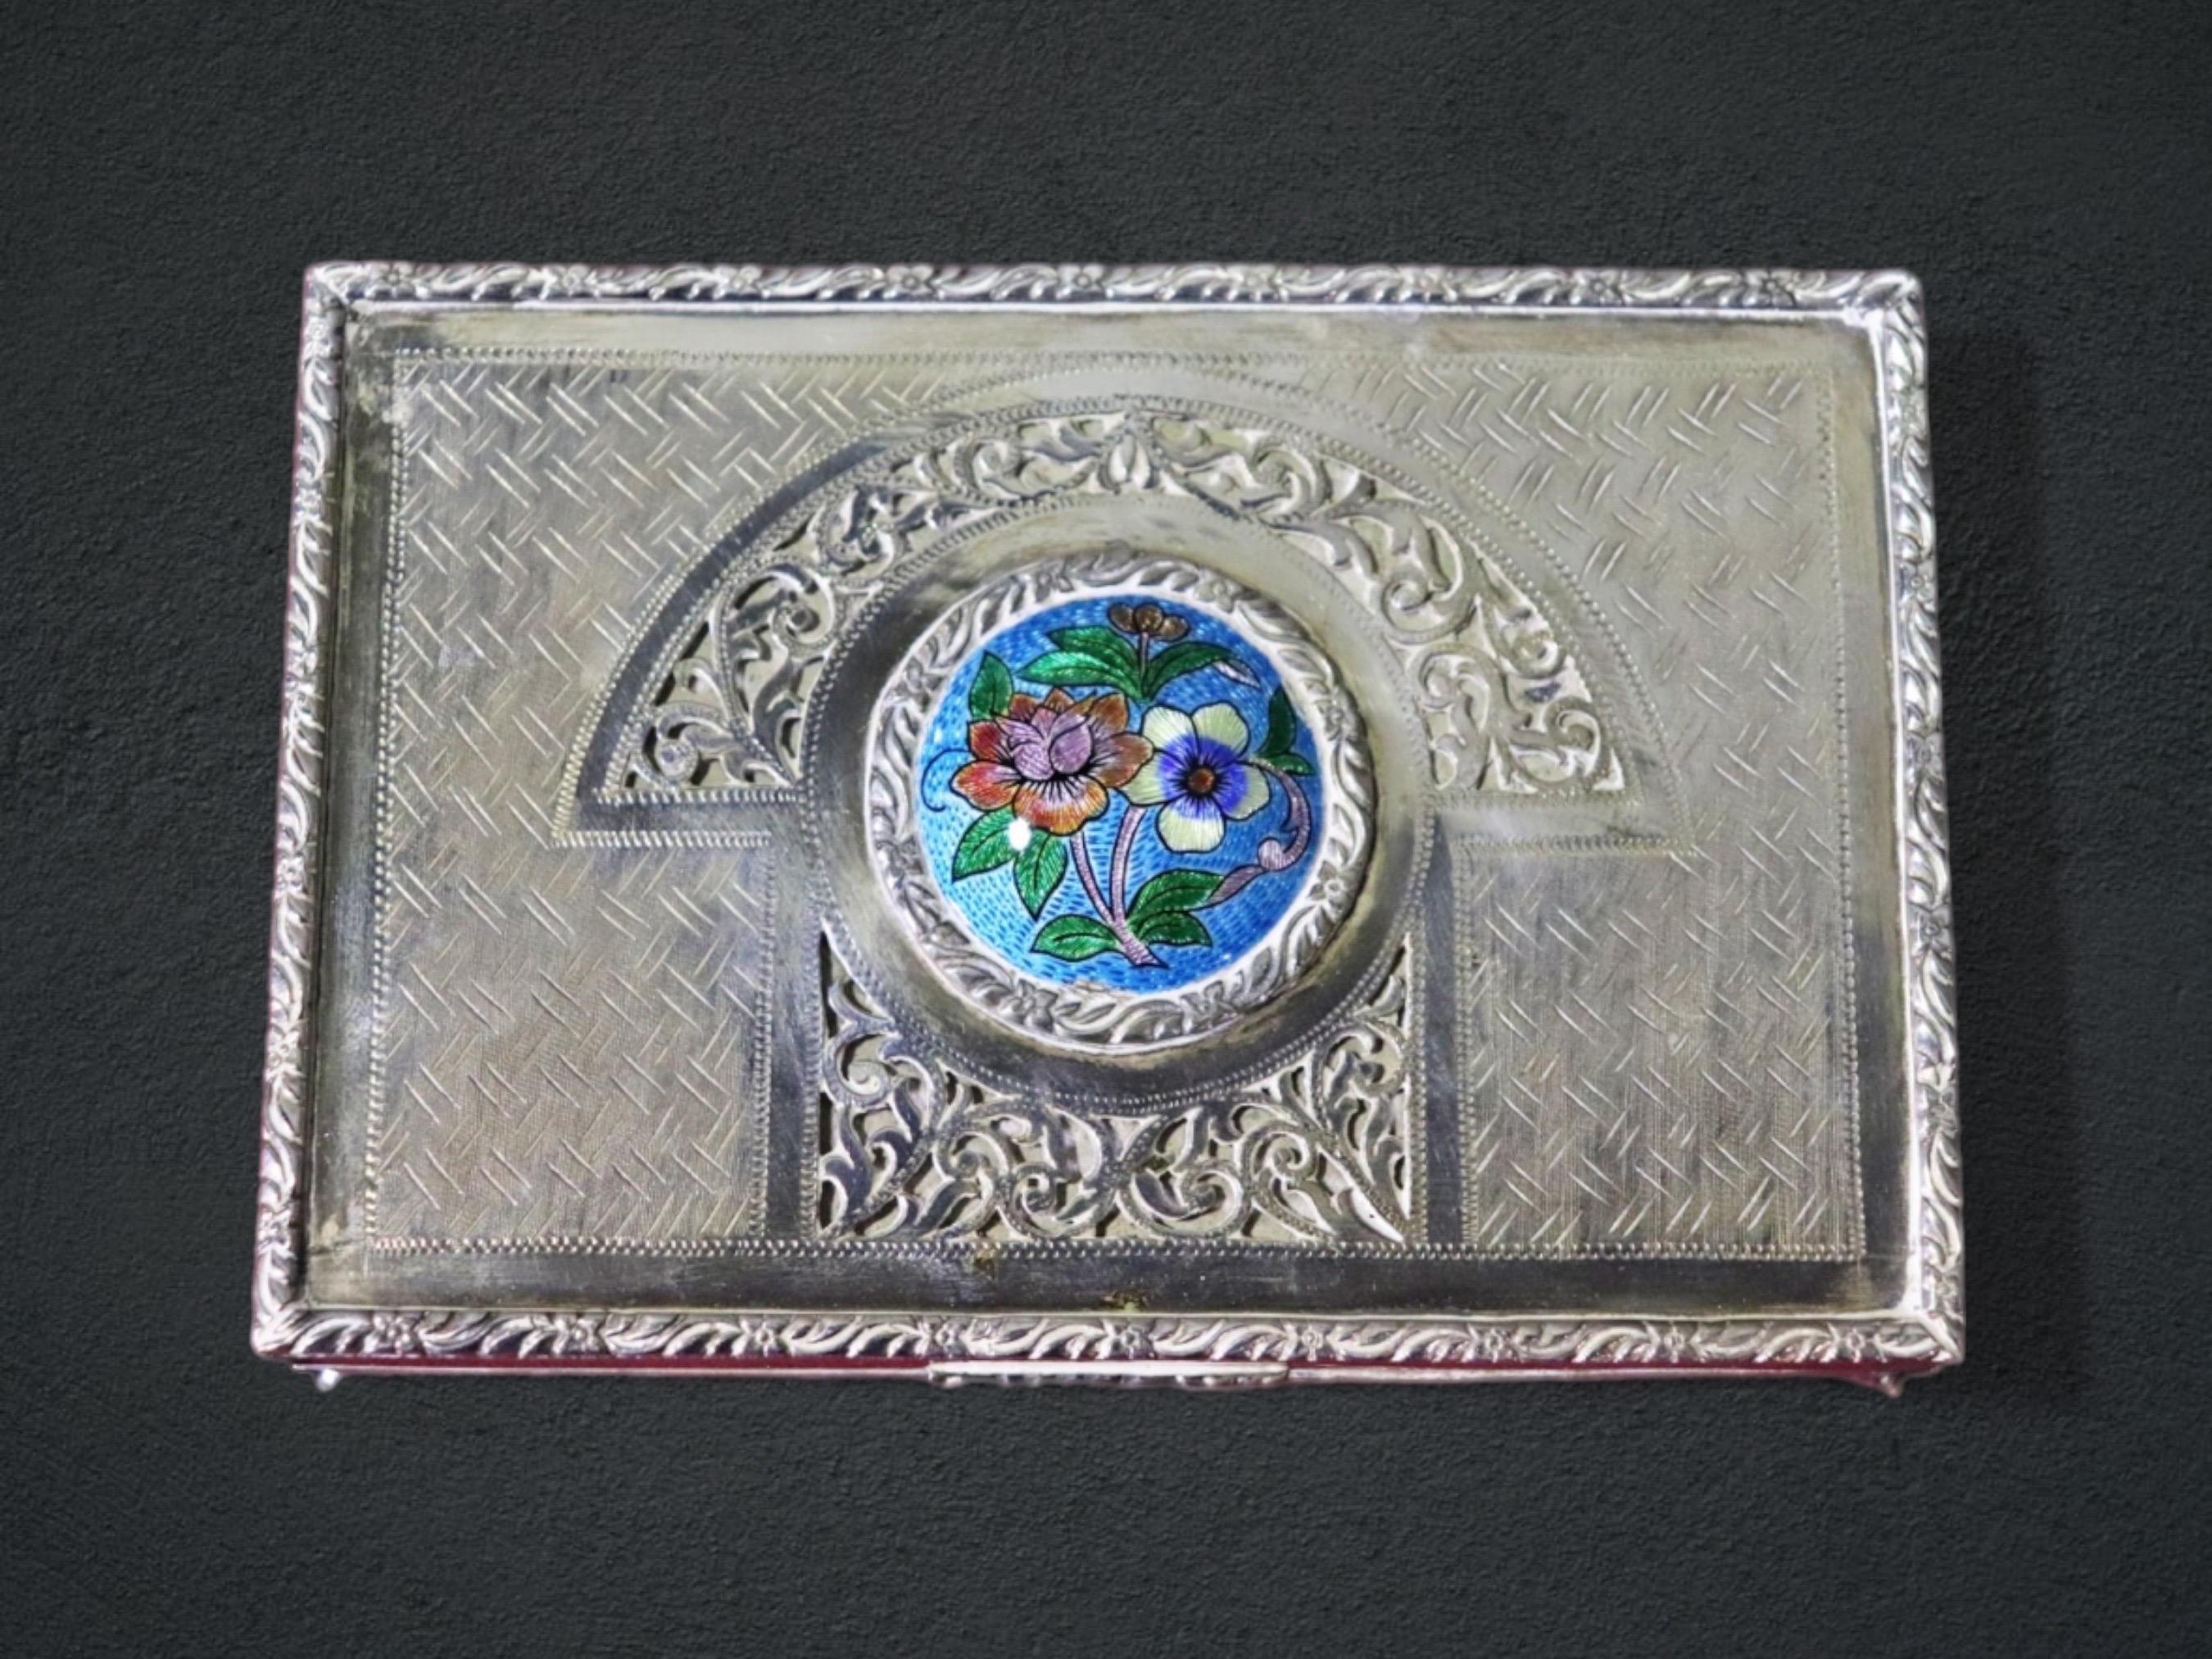 Dimensions- H: 1 1/2n W: 6in D: 4in Weight: 15.9 Troy OZ (with Plaque Included)

This late Continental 800 silver trinket box is perfect for you and your collection!  if you look at the photos provided, you will see the outstanding floral design